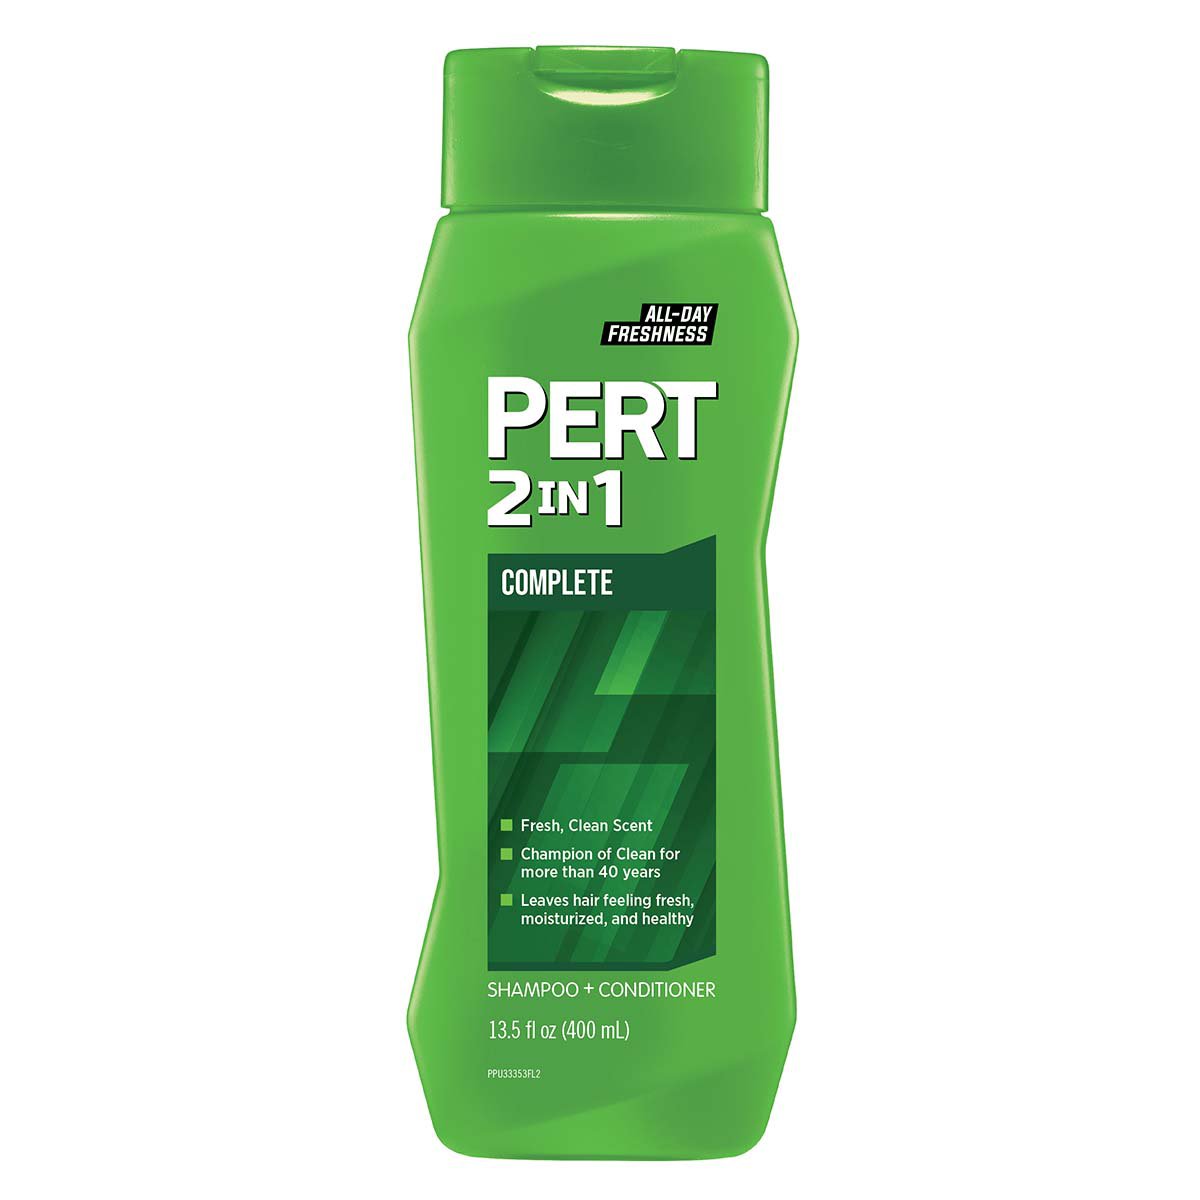 Plus 2-in-1 Clean and Conditioner for Normal Hair - Shop Shampoo & Conditioner H-E-B